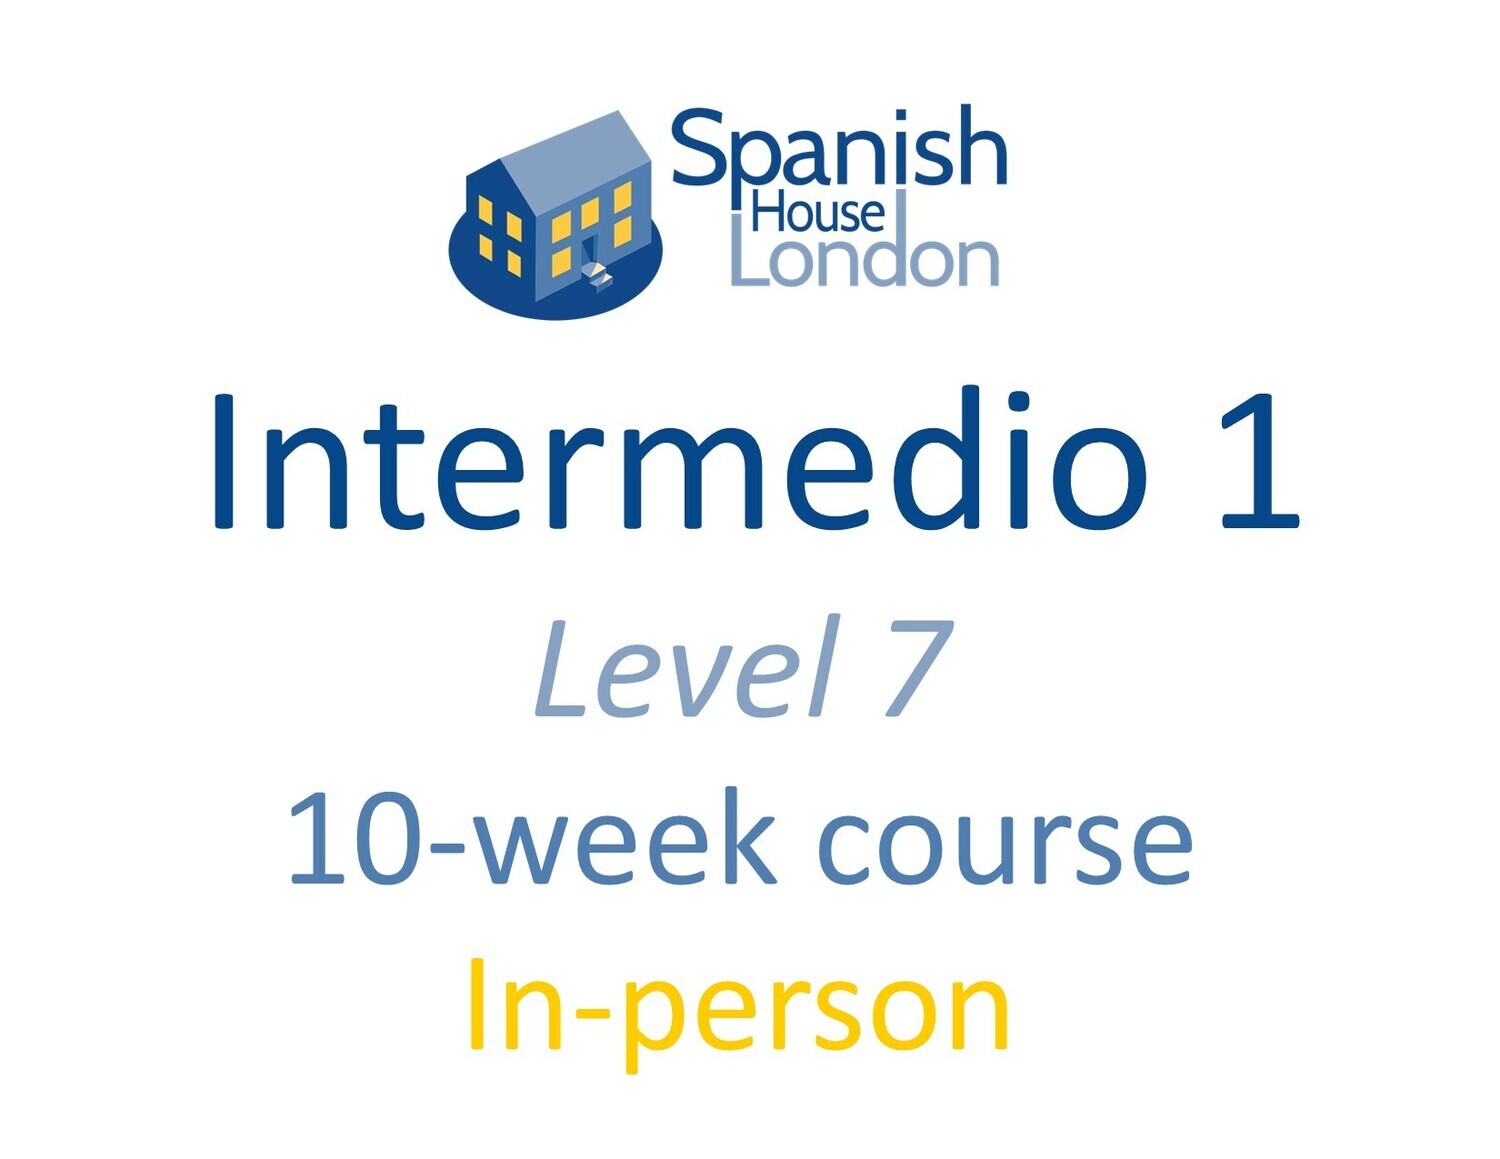 Intermedio 1 Course starting on 8th November at 7.30pm in Clapham North